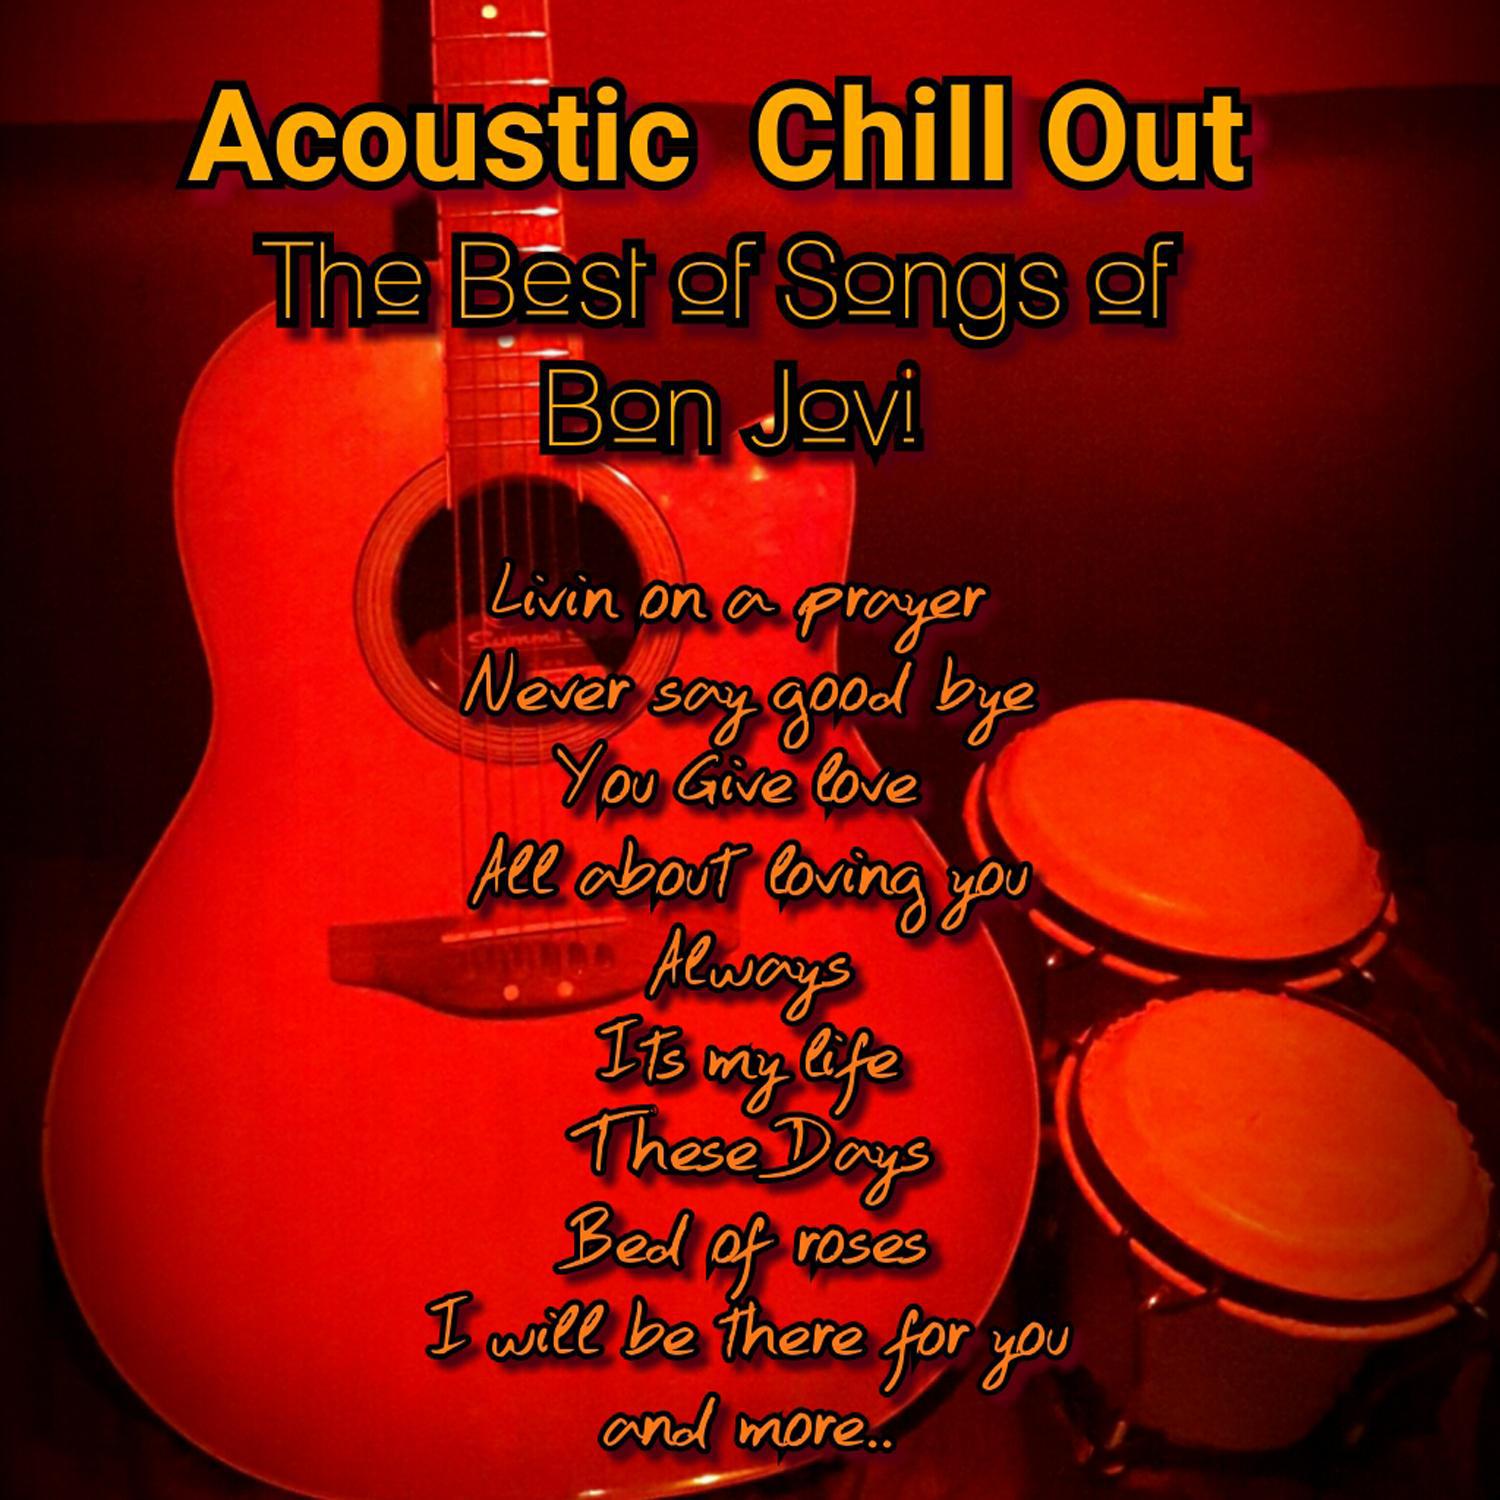 Acoustic Chill Out - Aleluya